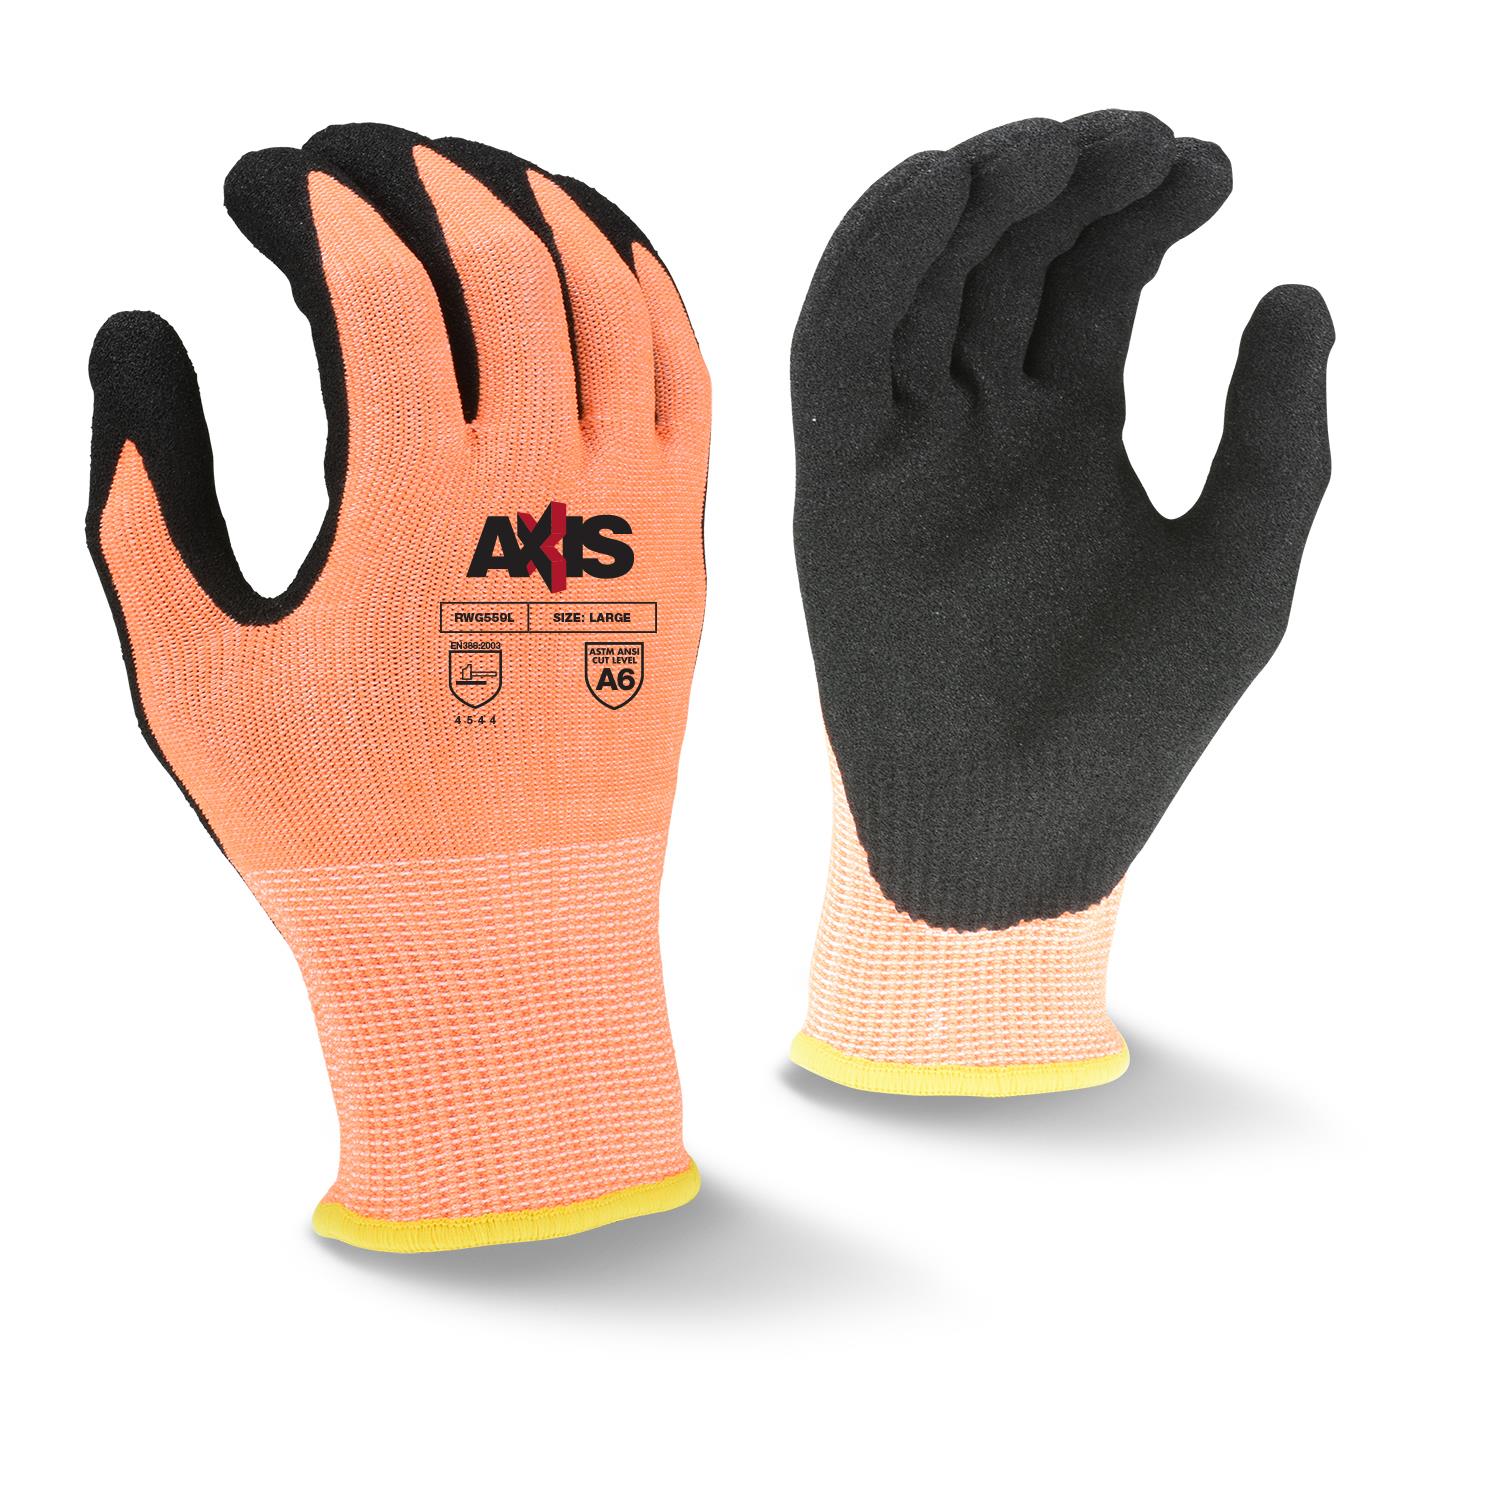 RADIANS AXIS RWG559 SANDY NITRILE PALM - Cut Resistant Gloves